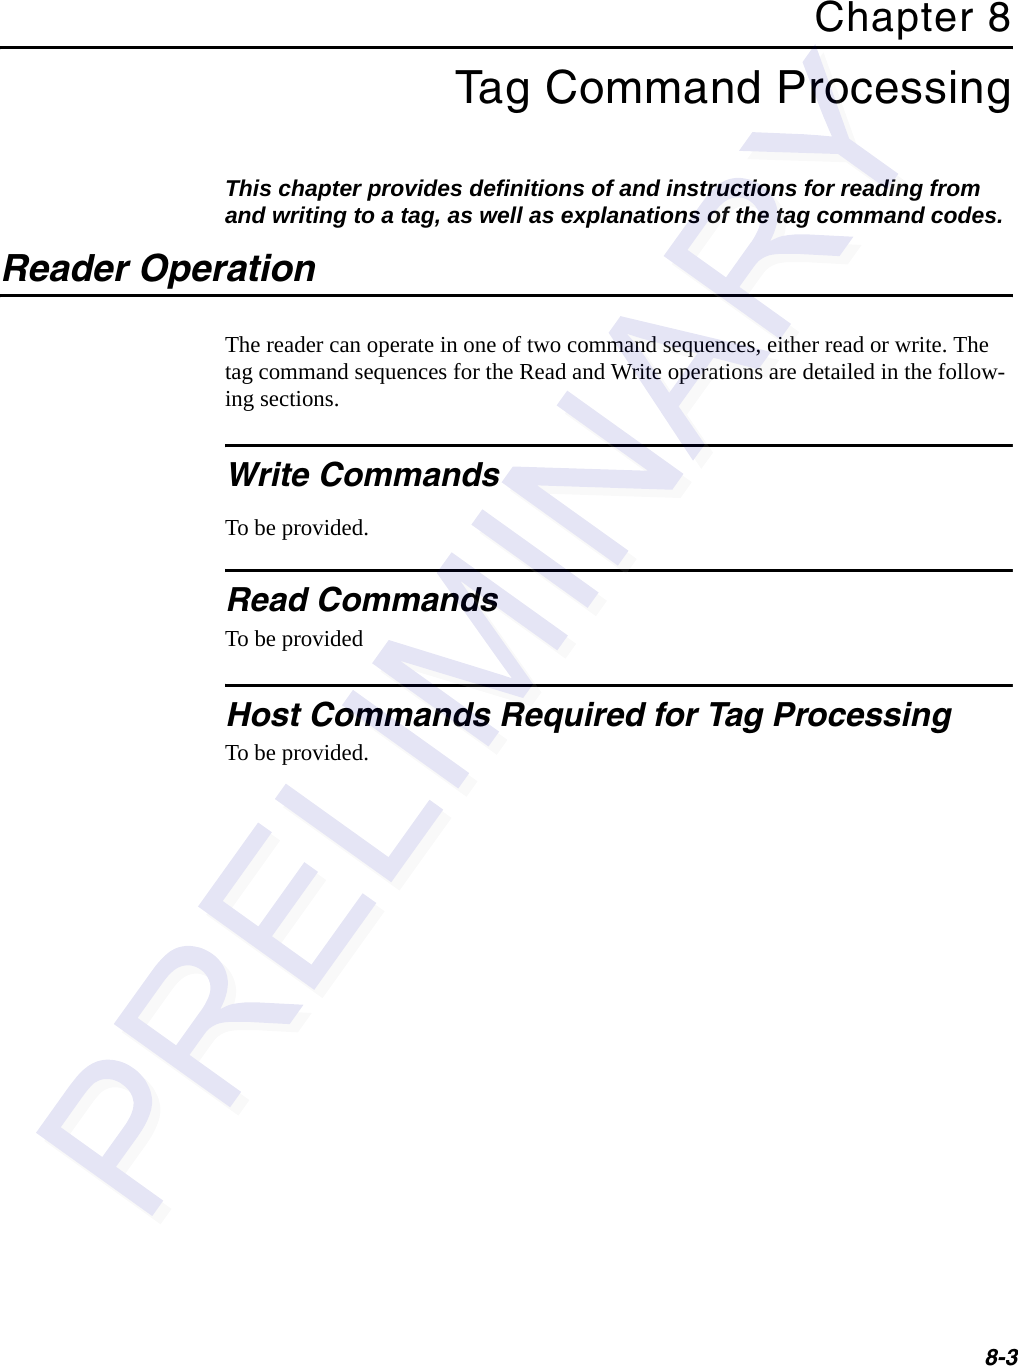 8-3Chapter 8Tag Command ProcessingThis chapter provides definitions of and instructions for reading from and writing to a tag, as well as explanations of the tag command codes.Reader OperationThe reader can operate in one of two command sequences, either read or write. The tag command sequences for the Read and Write operations are detailed in the follow-ing sections.Write CommandsTo be provided.Read CommandsTo be providedHost Commands Required for Tag ProcessingTo be provided.